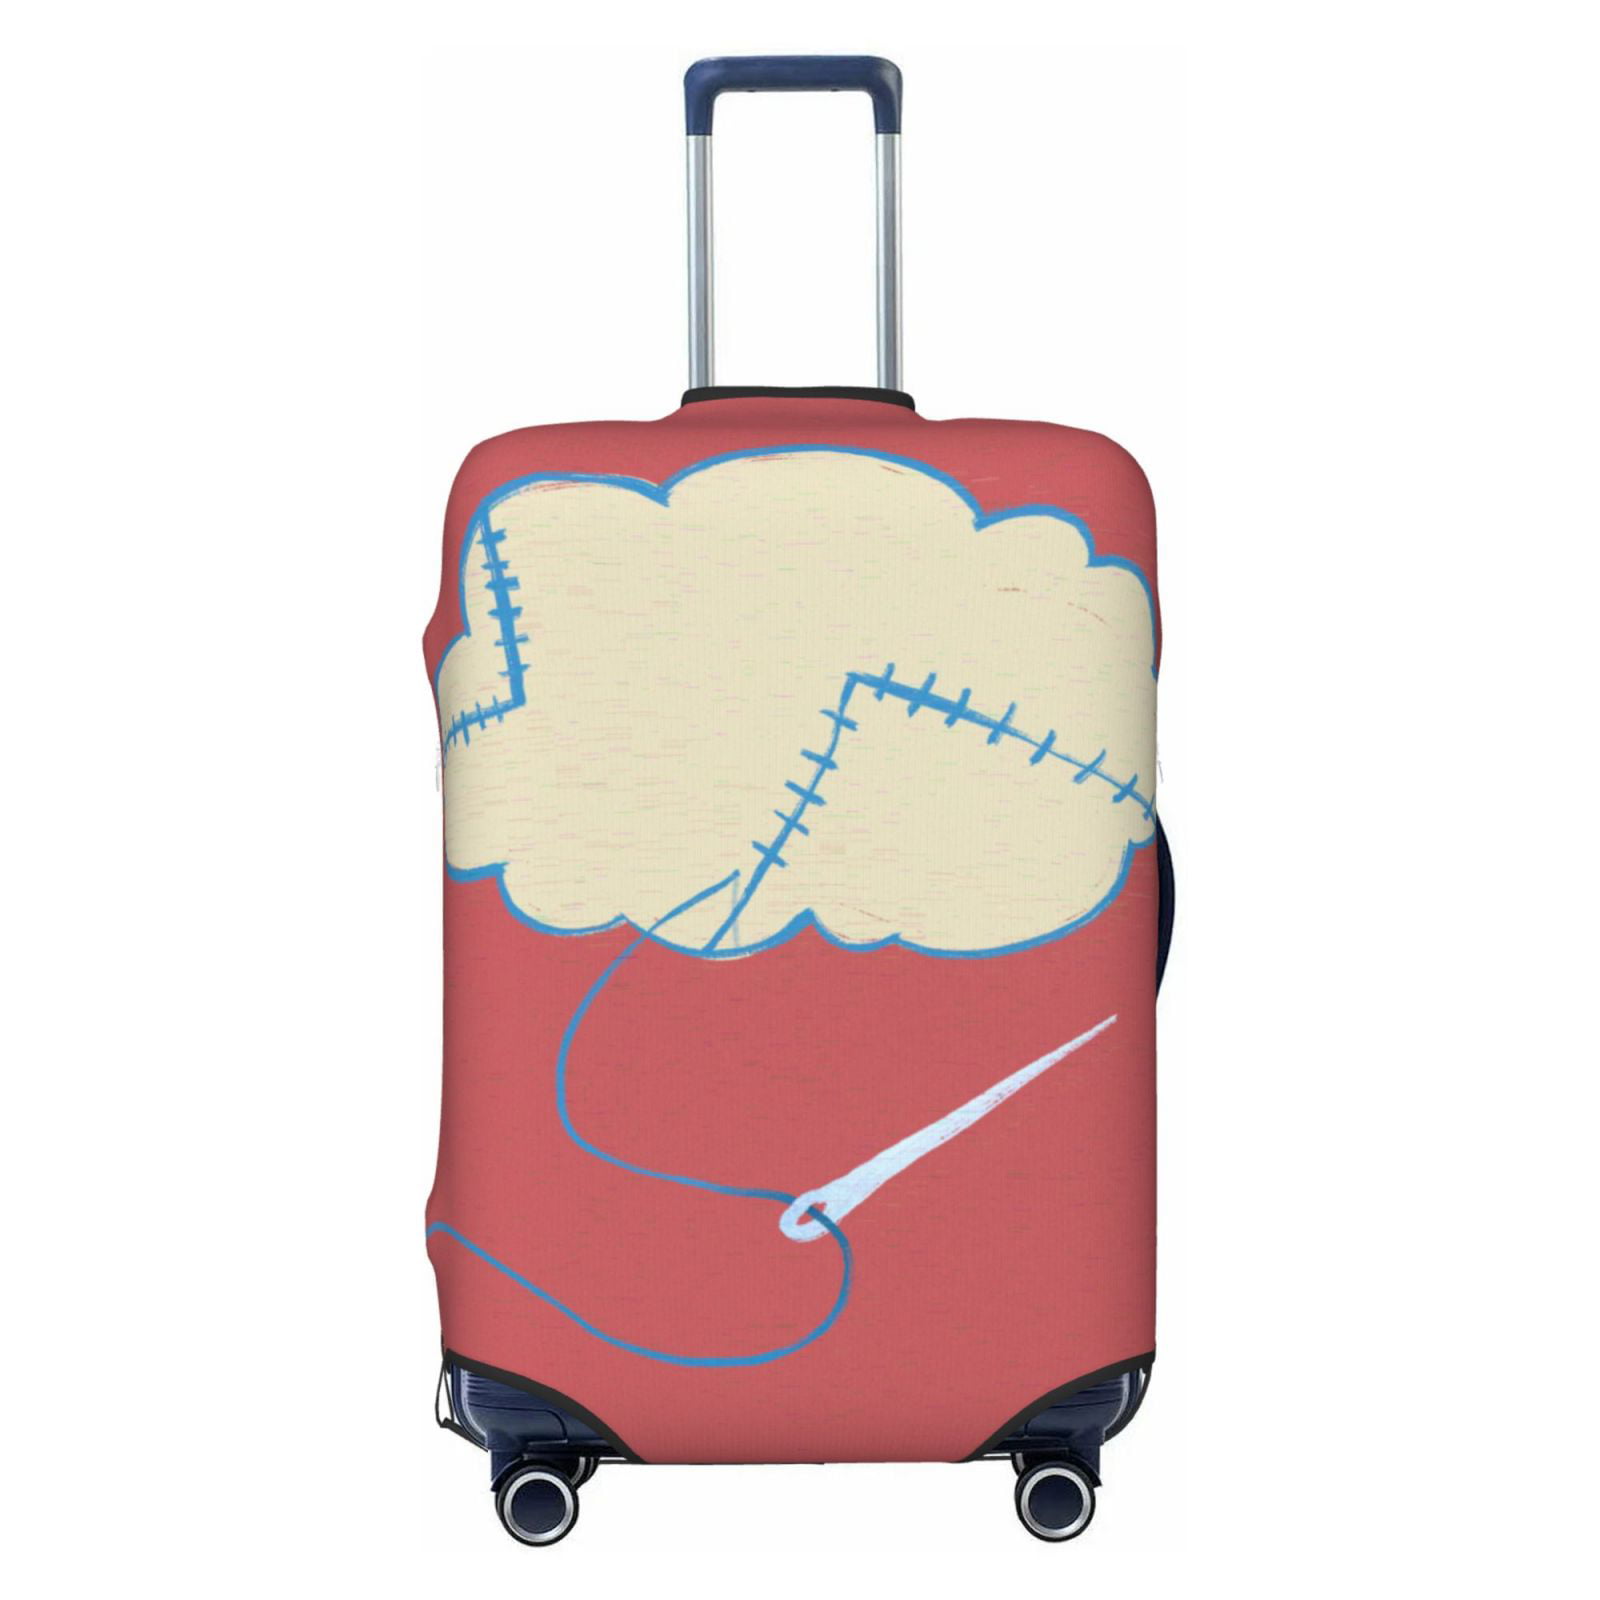 Travel Luggage Cover Protector，Washable Luggage Cover - Cartoon